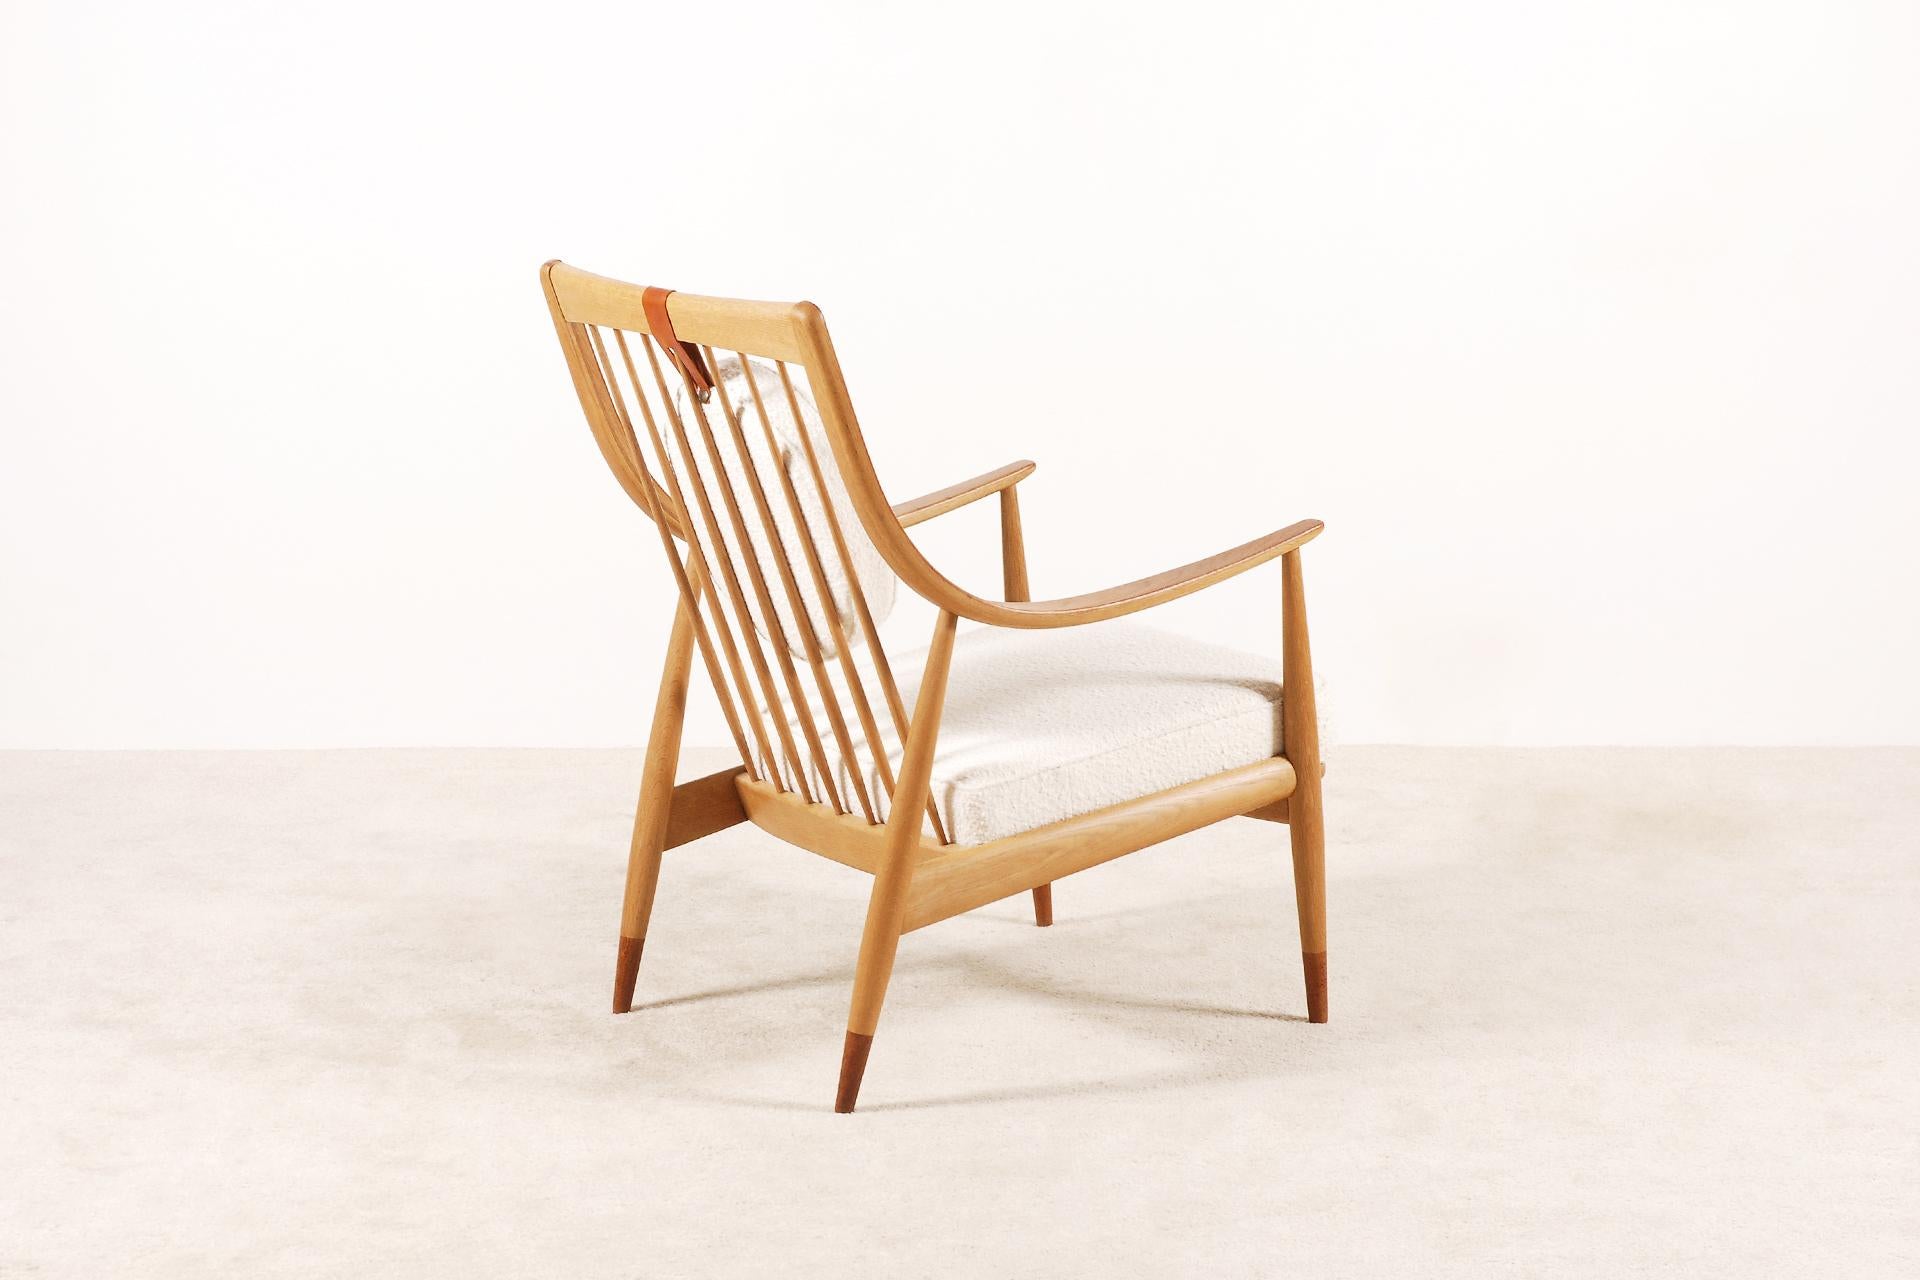 Rare Armchair model FD144 designed in 1953 by Peter Hvidt & Orla Mølgaard-Nielsen. Produced by France & Daverkosen in Denmark.
This easy chair is made of solid oakwood, and has also lovely teak feet and armrests.
Manufacturer stamp marked on the